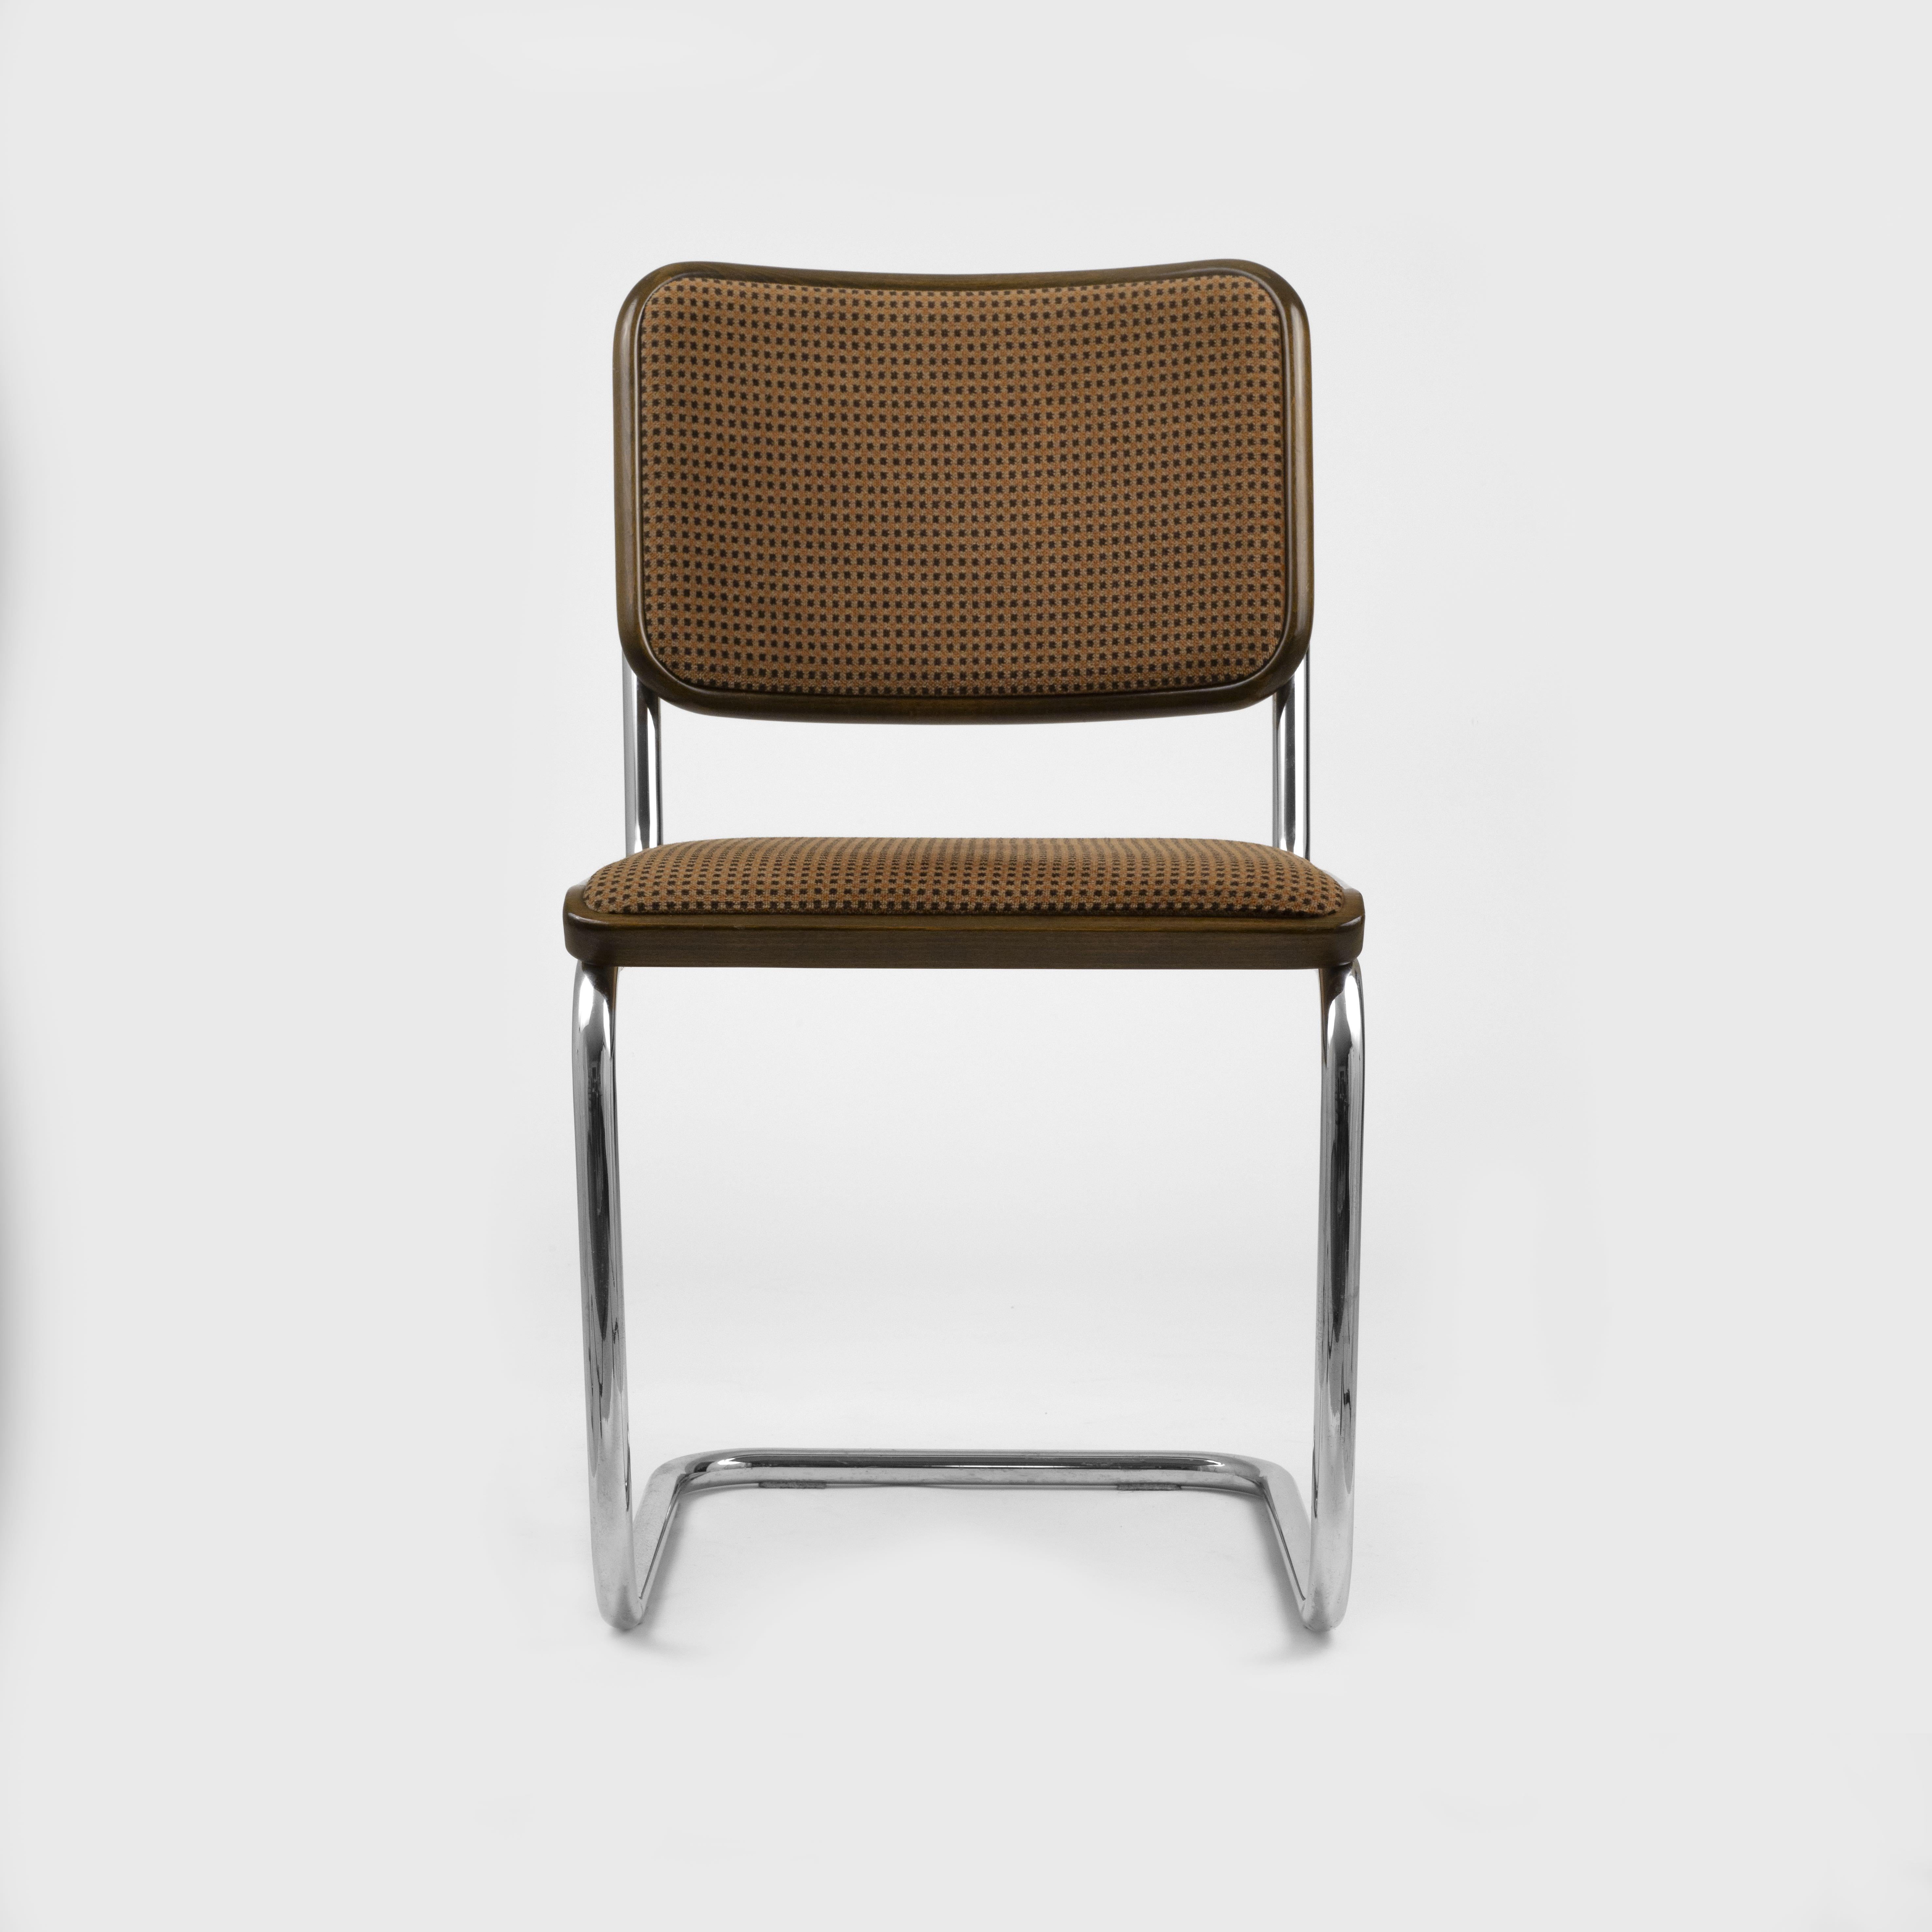 An original set of 4 Marcel Breuer Cesca chairs produced by Thonet. These are an uncommon finish color and retain original vintage velvet custom upholstery that mimics the look of caning while adding to the comfort and durability of this classic